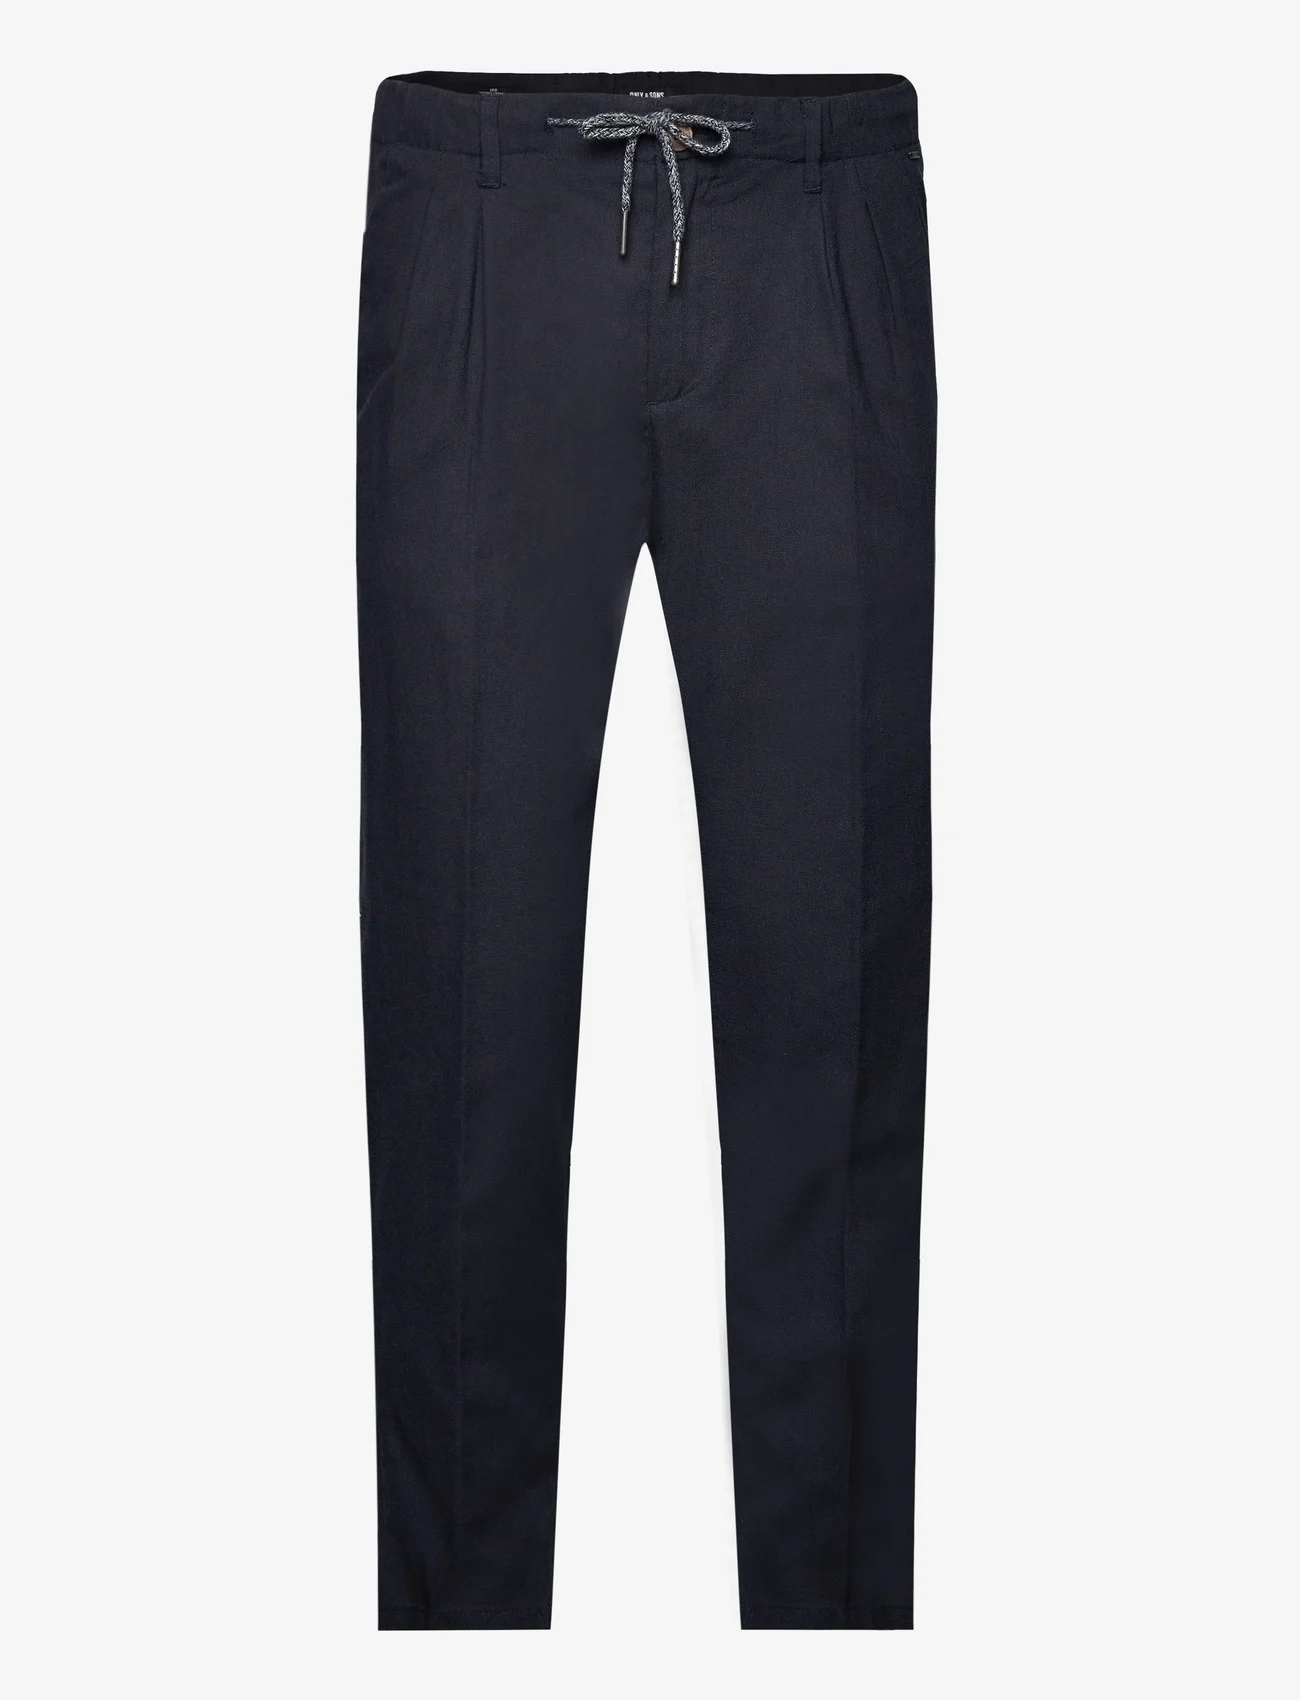 ONLY & SONS - ONSLEO CROP LINEN MIX 0048 PANT - linen trousers - dark navy - 0